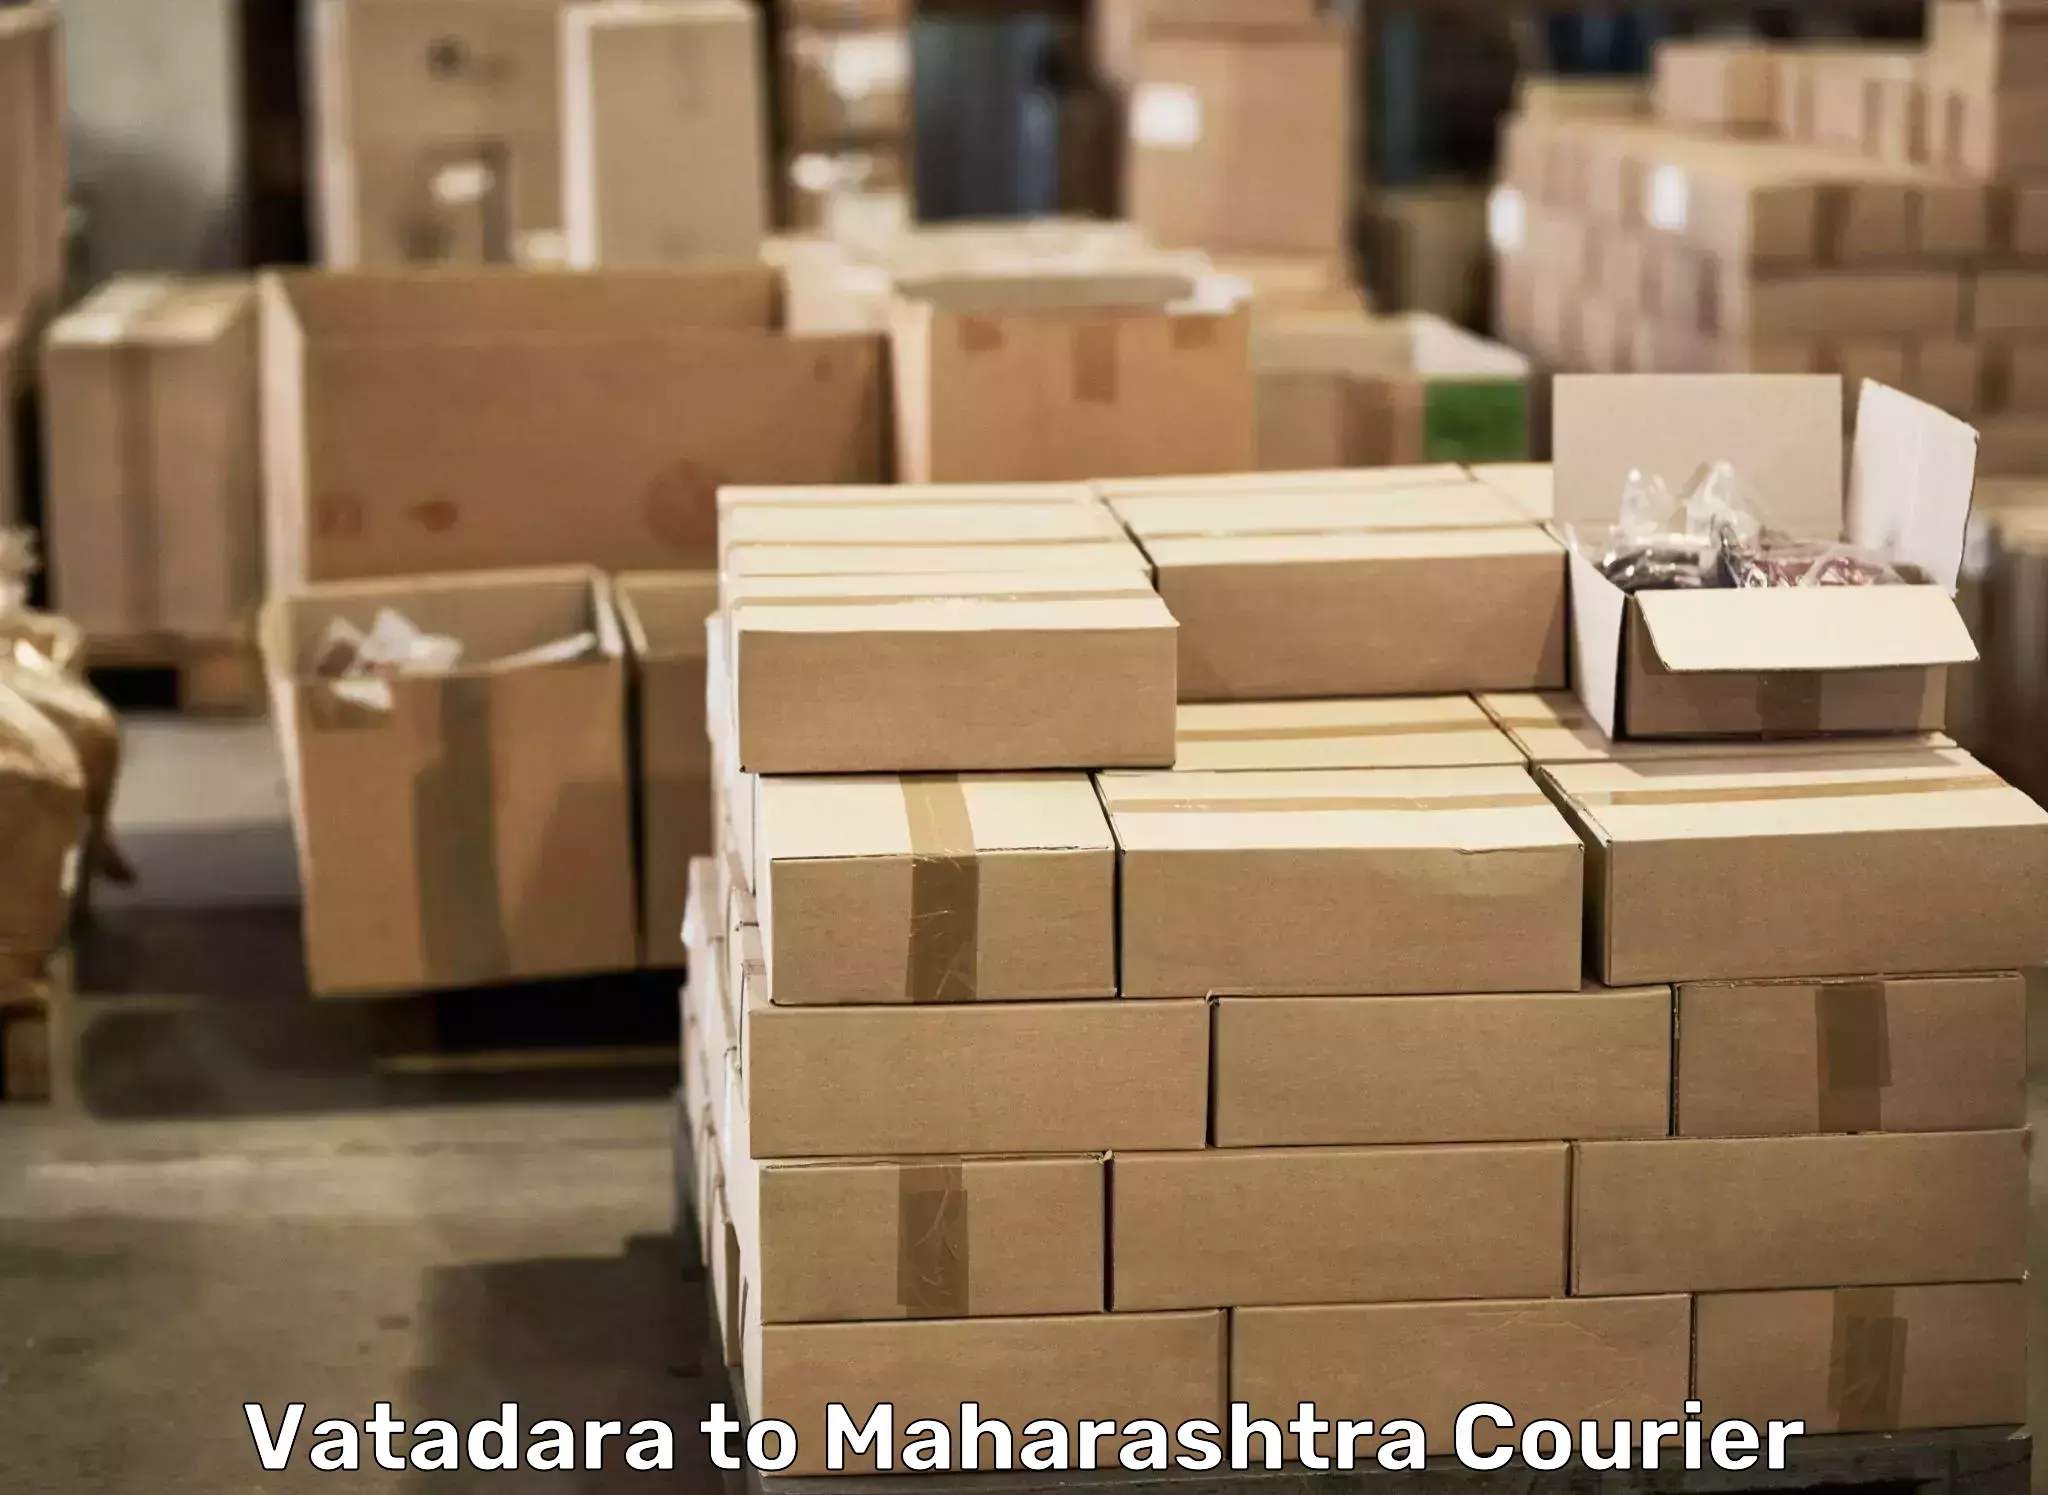 Professional movers and packers in Vatadara to Loni Ahmednagar